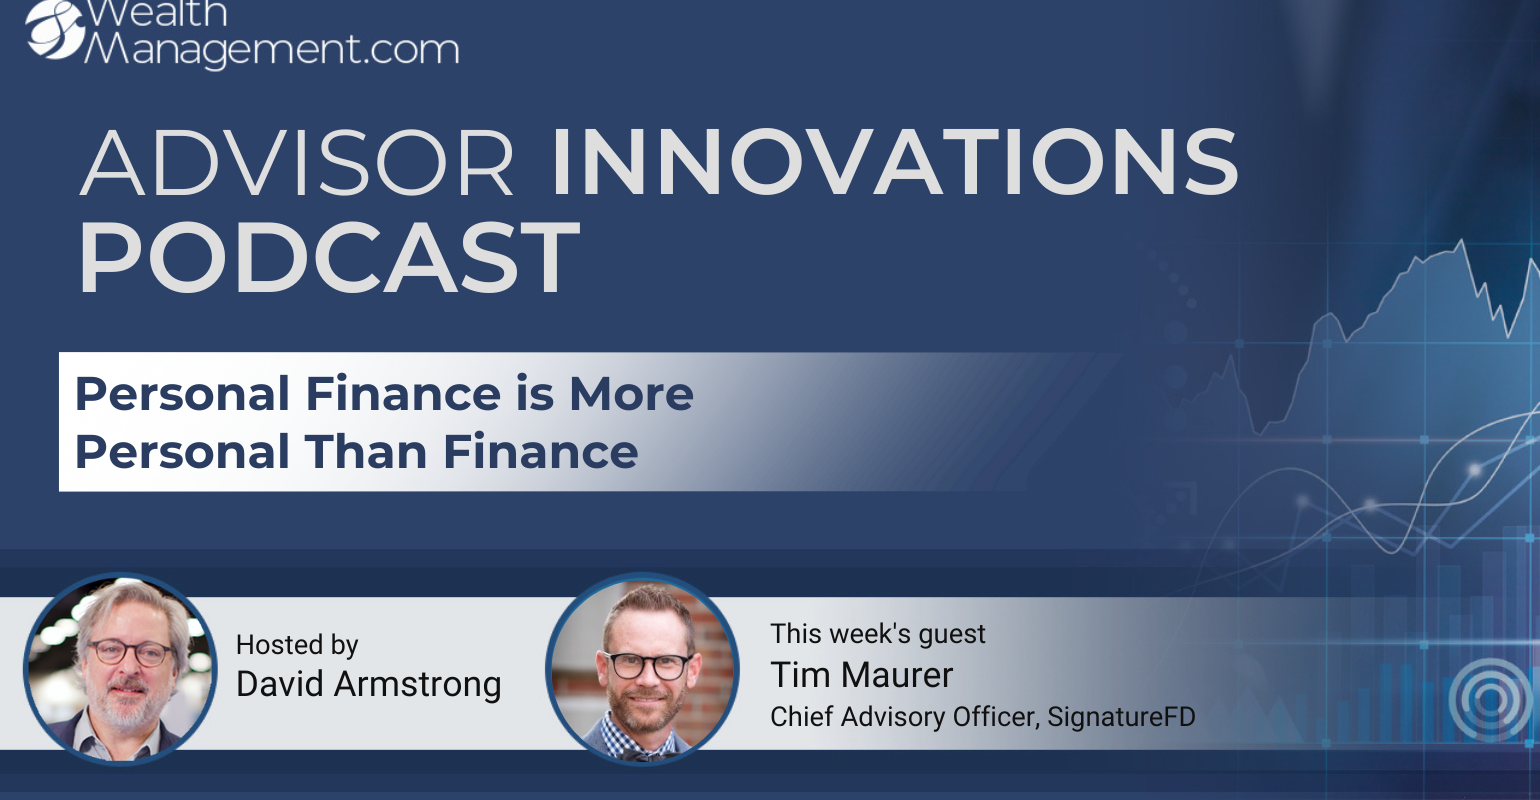 Advisor Innovations Podcast: Tim Maurer on Why Personal Finance is More Personal Than Finance